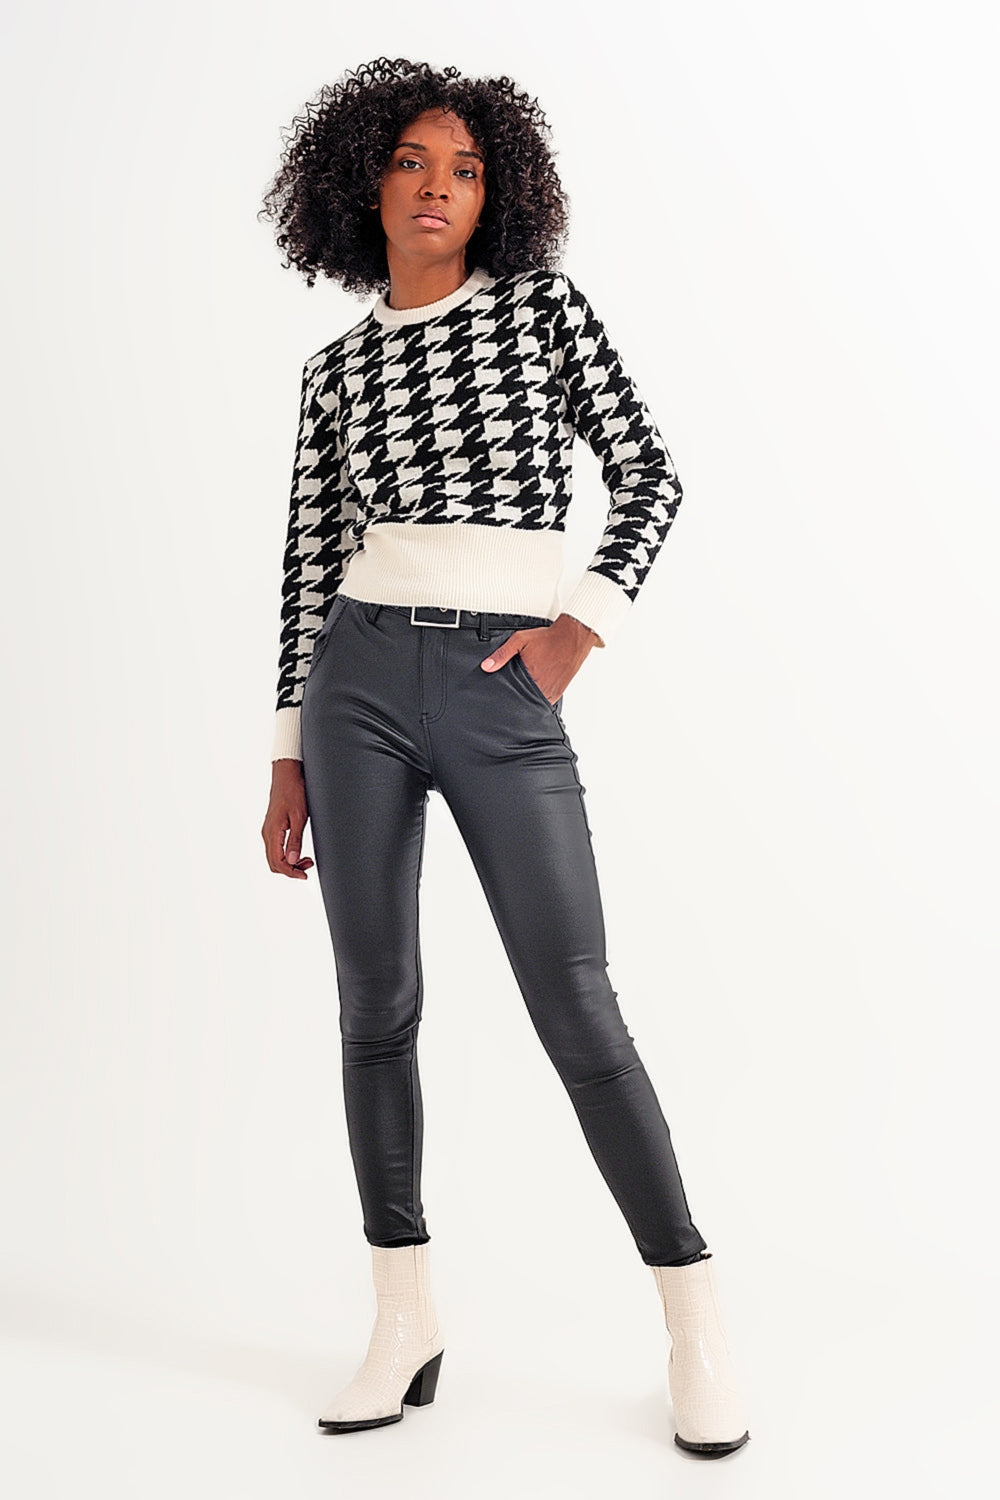 Bacall Black & White Vintage  Long Sleeve Houndstooth Sweater | Q2